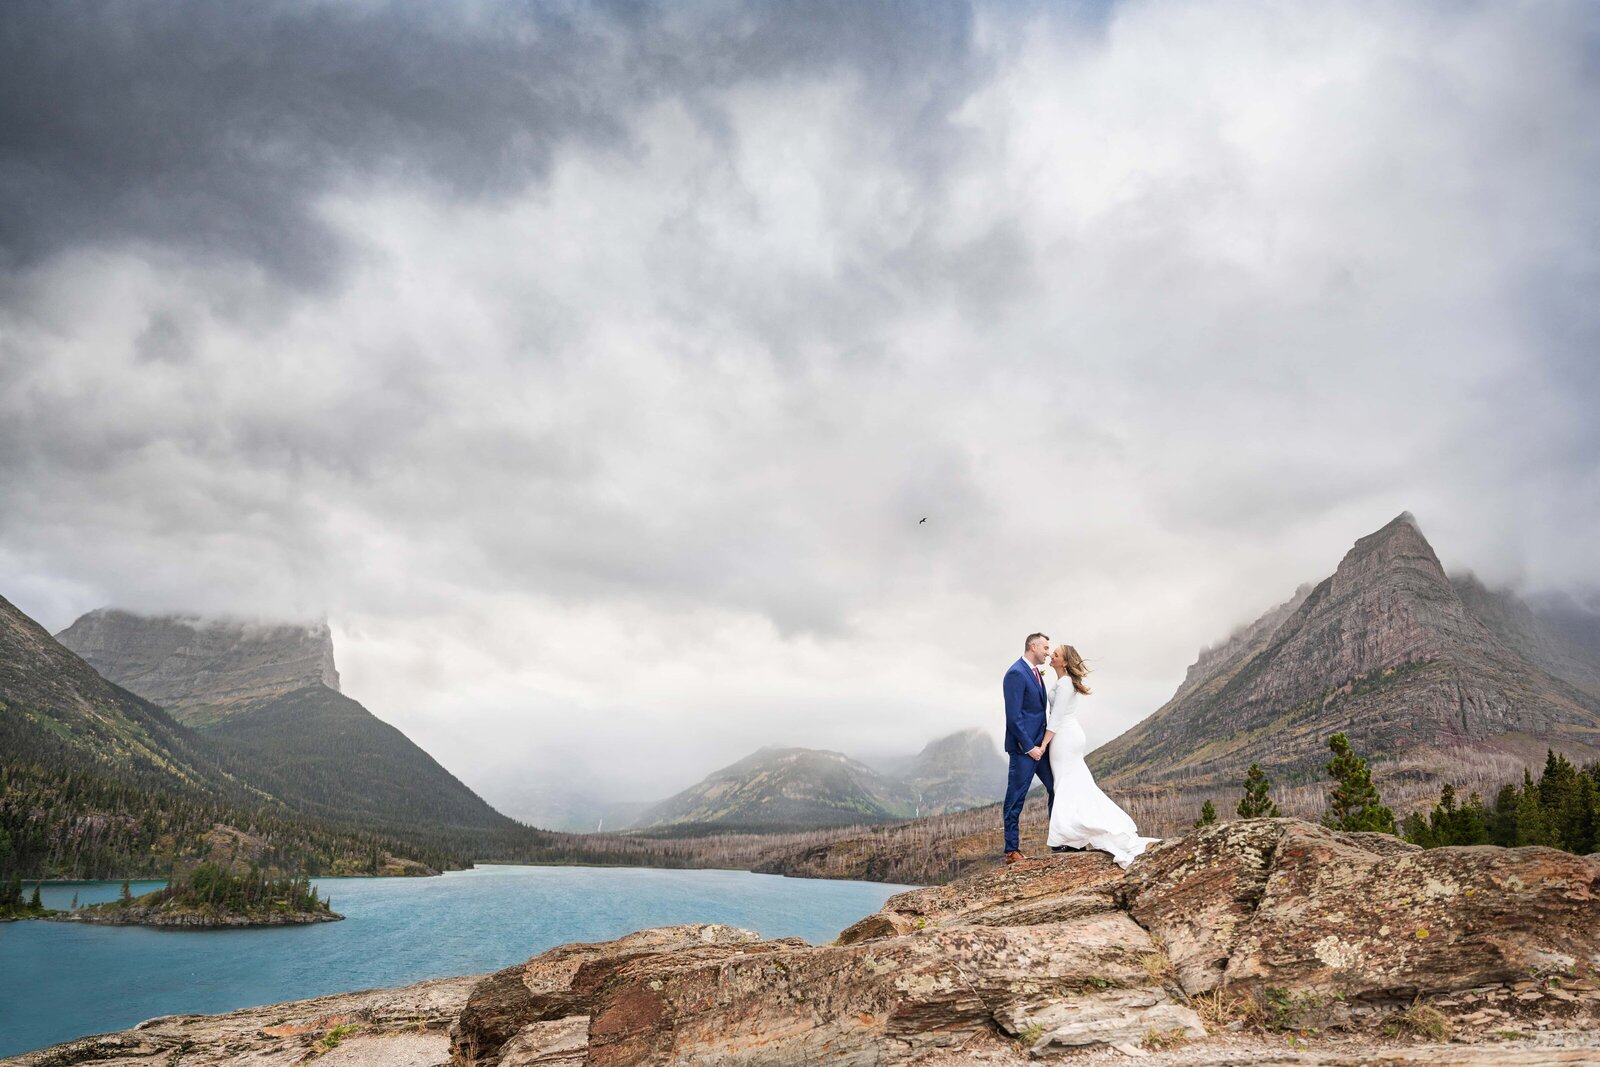 Bride and Groom during epic photo in Glacier National Park for their wedding session